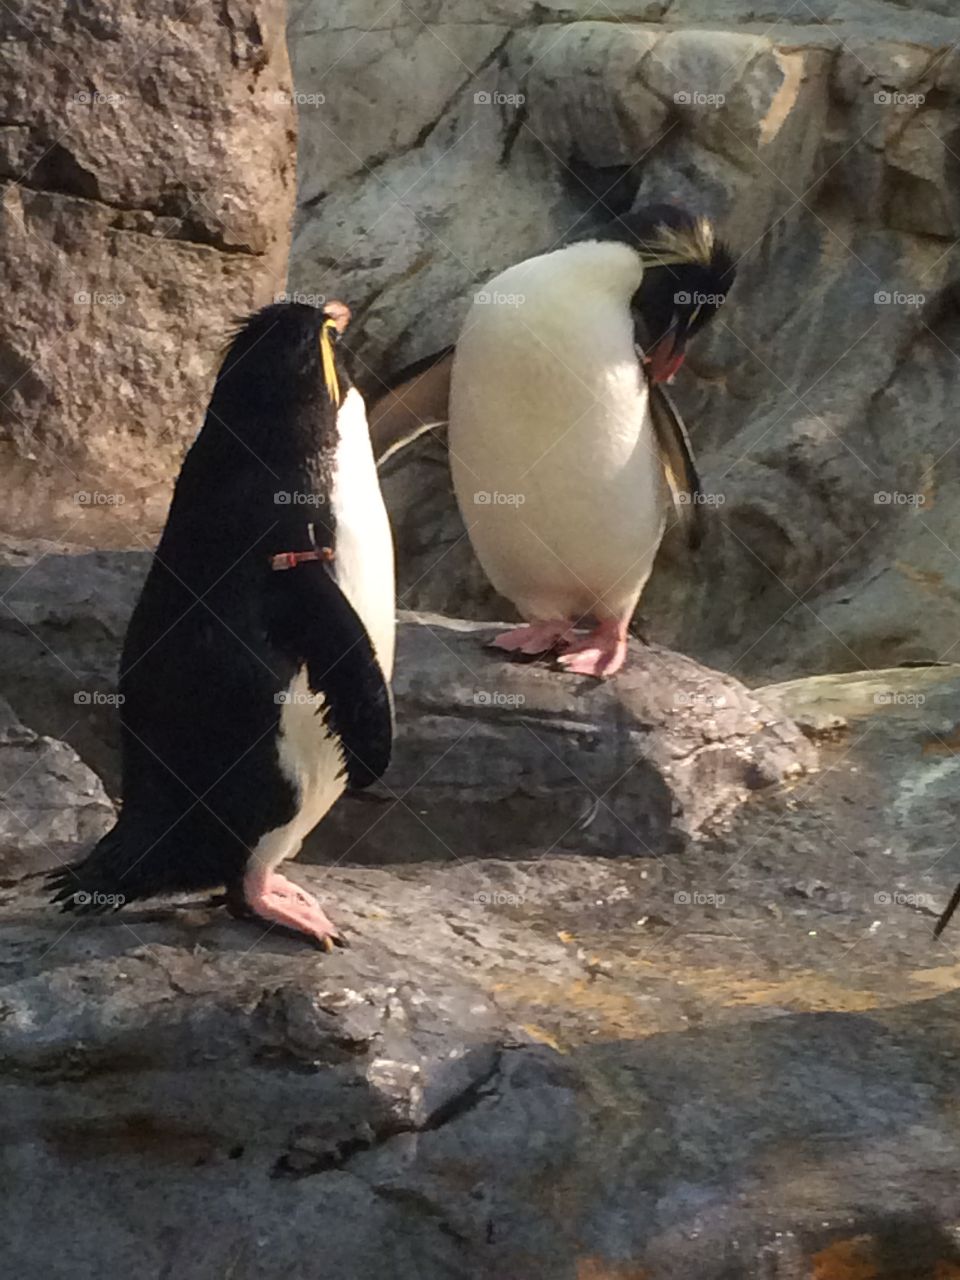 Penguins at the zoo